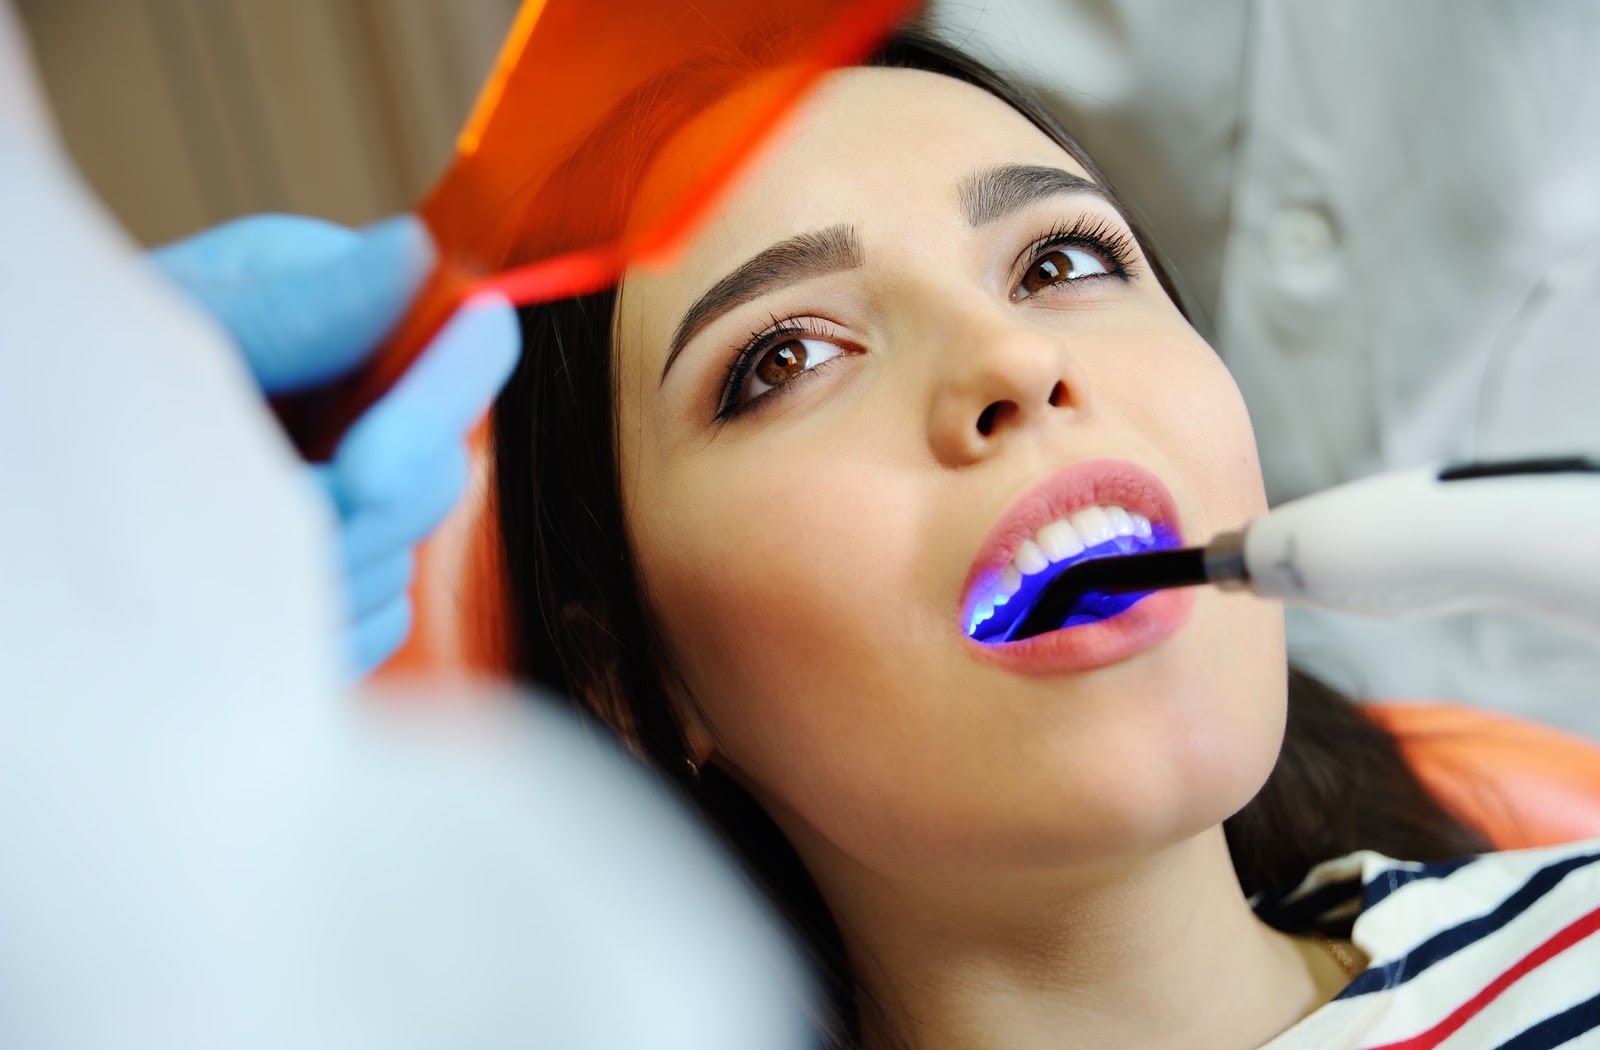 A young woman during her dental filling appointment